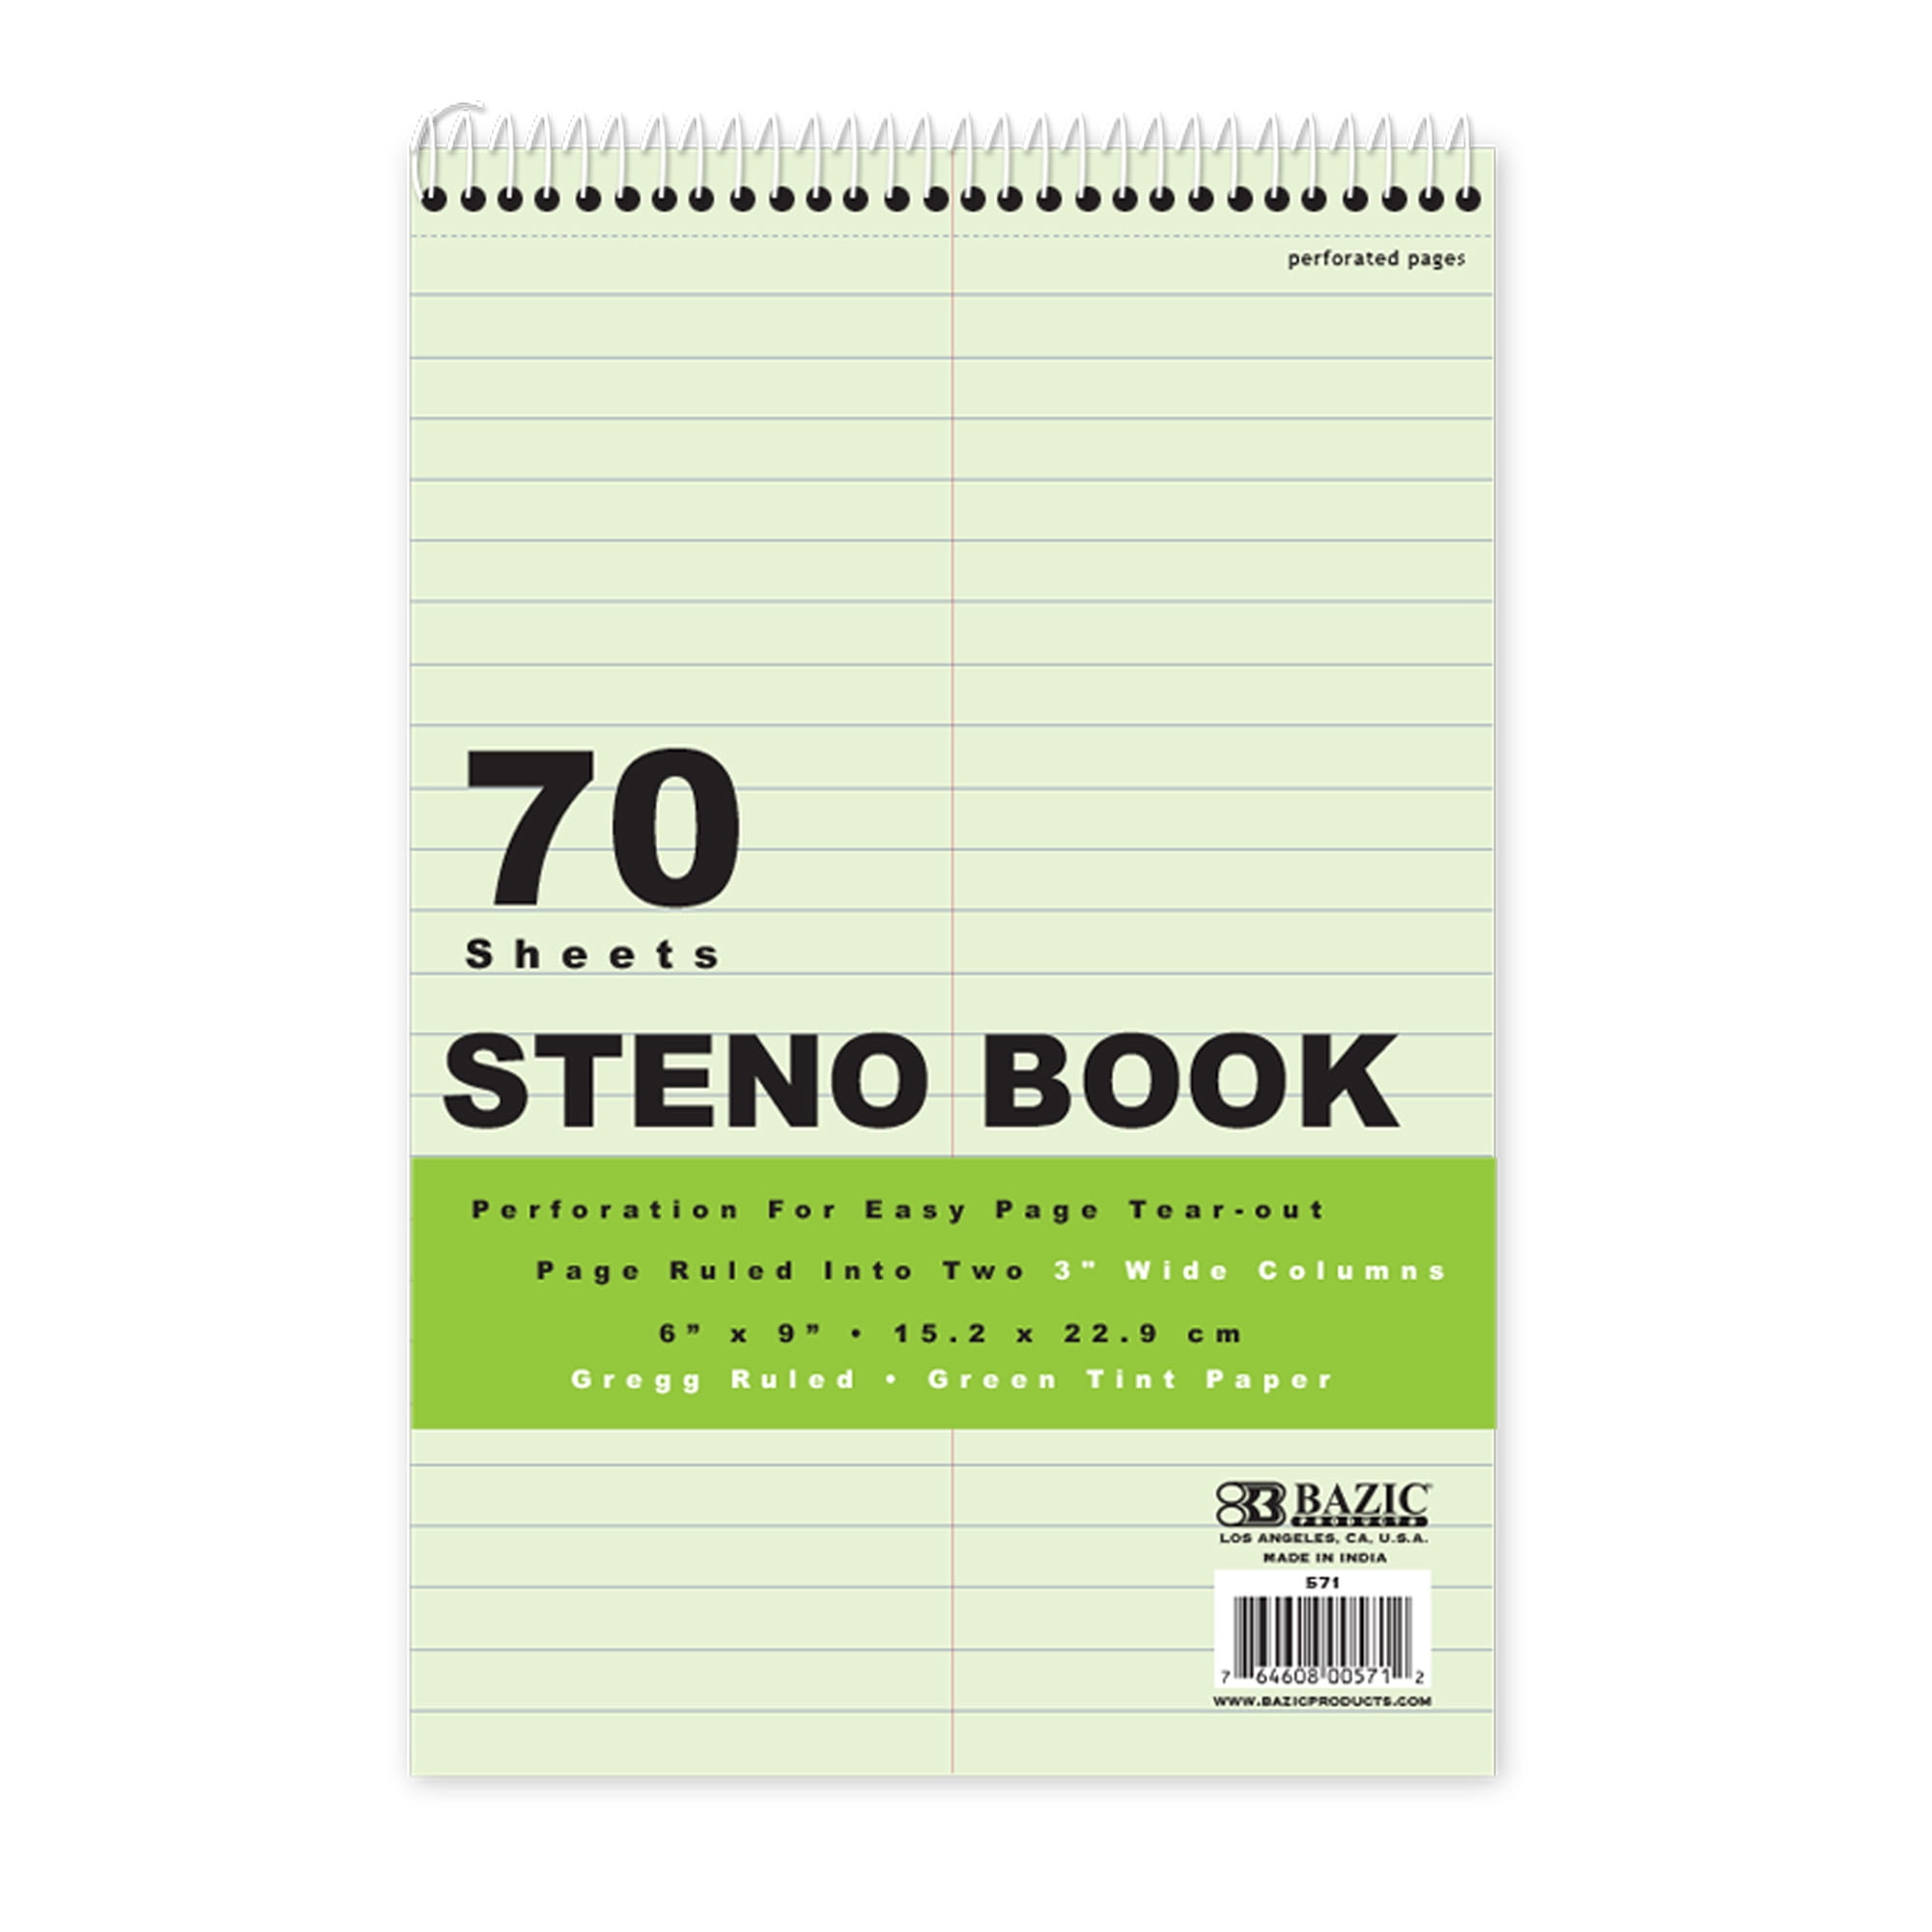 60 Sheets Gregg Rule Steno Books Green Tint Paper 12 Pack 6 x 9 